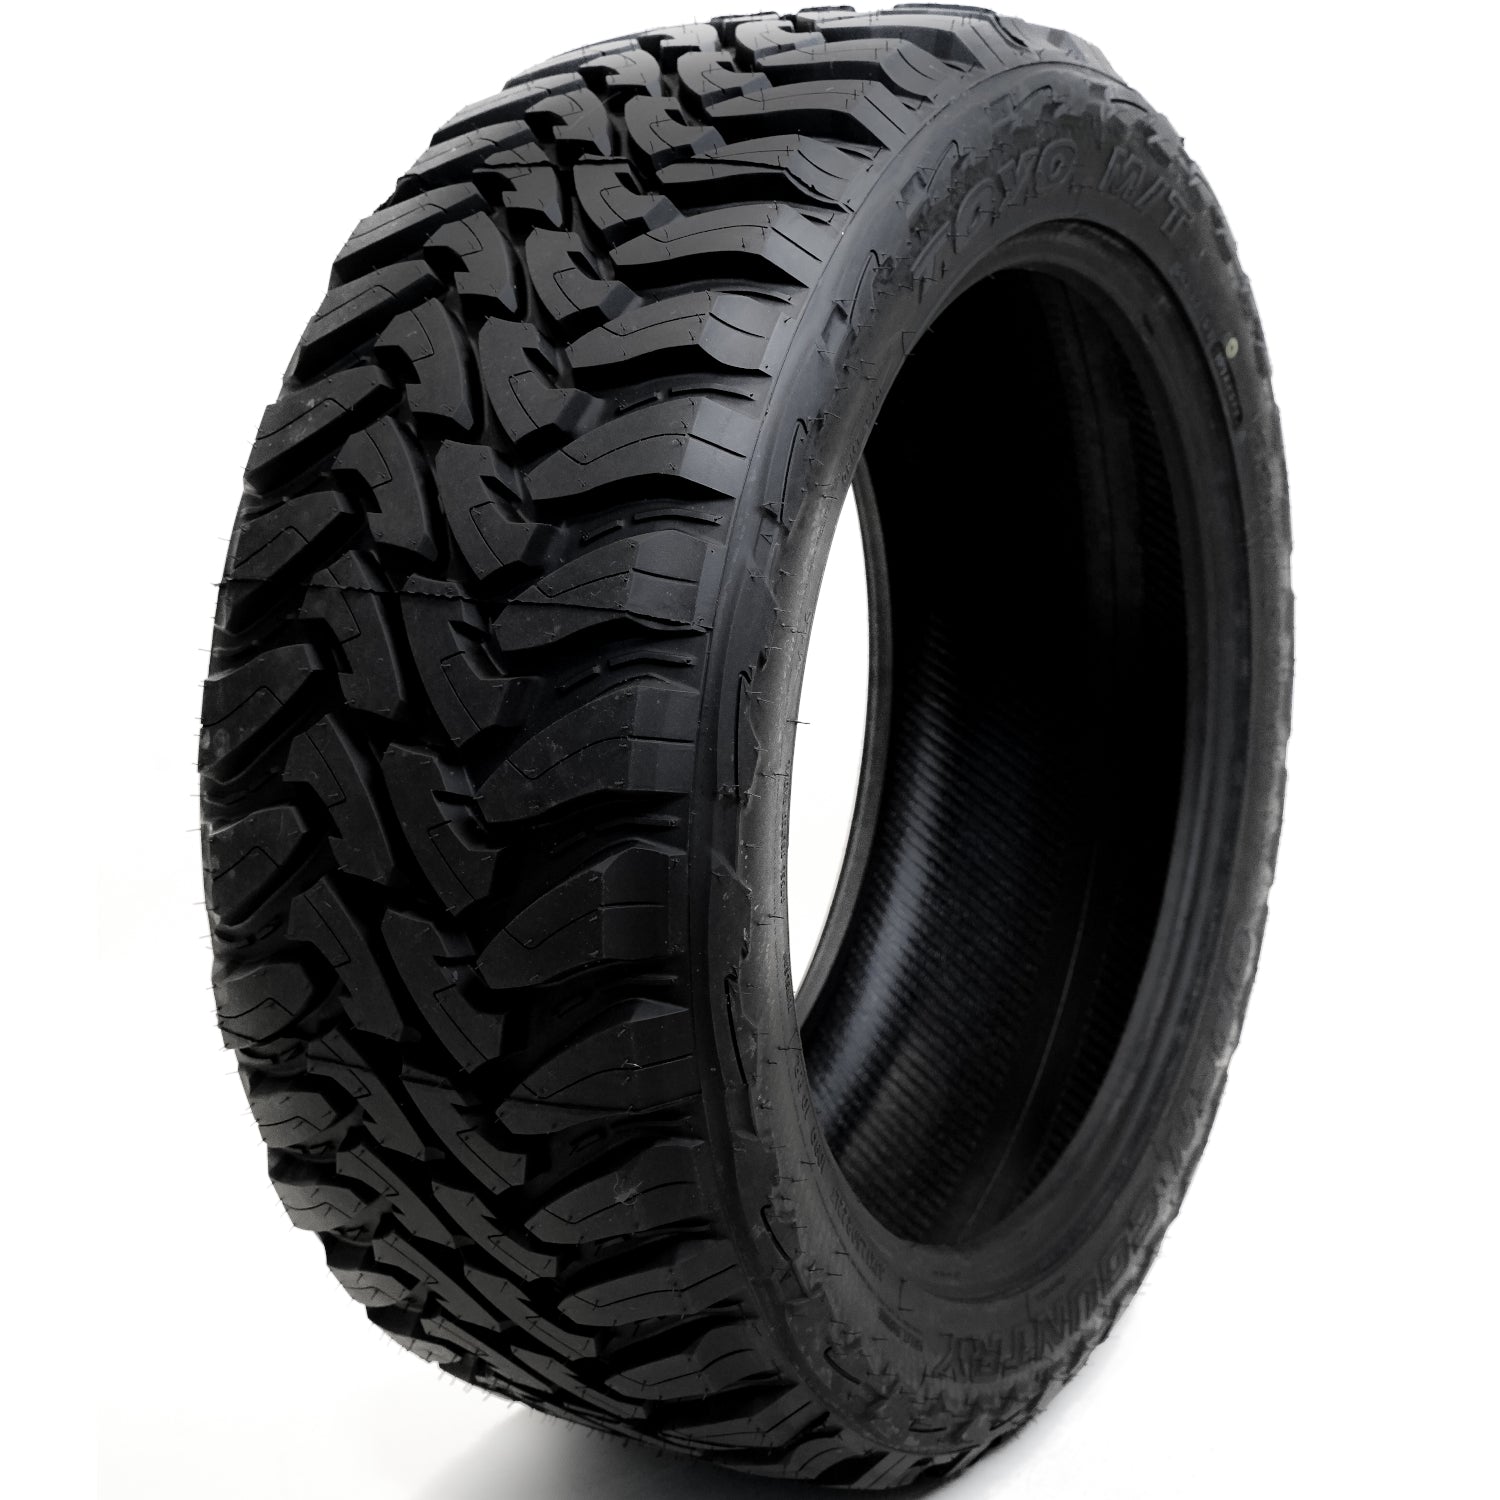 TOYO TIRES OPEN COUNTRY M/T LT305/70R16 (33X12.2R 16) Tires